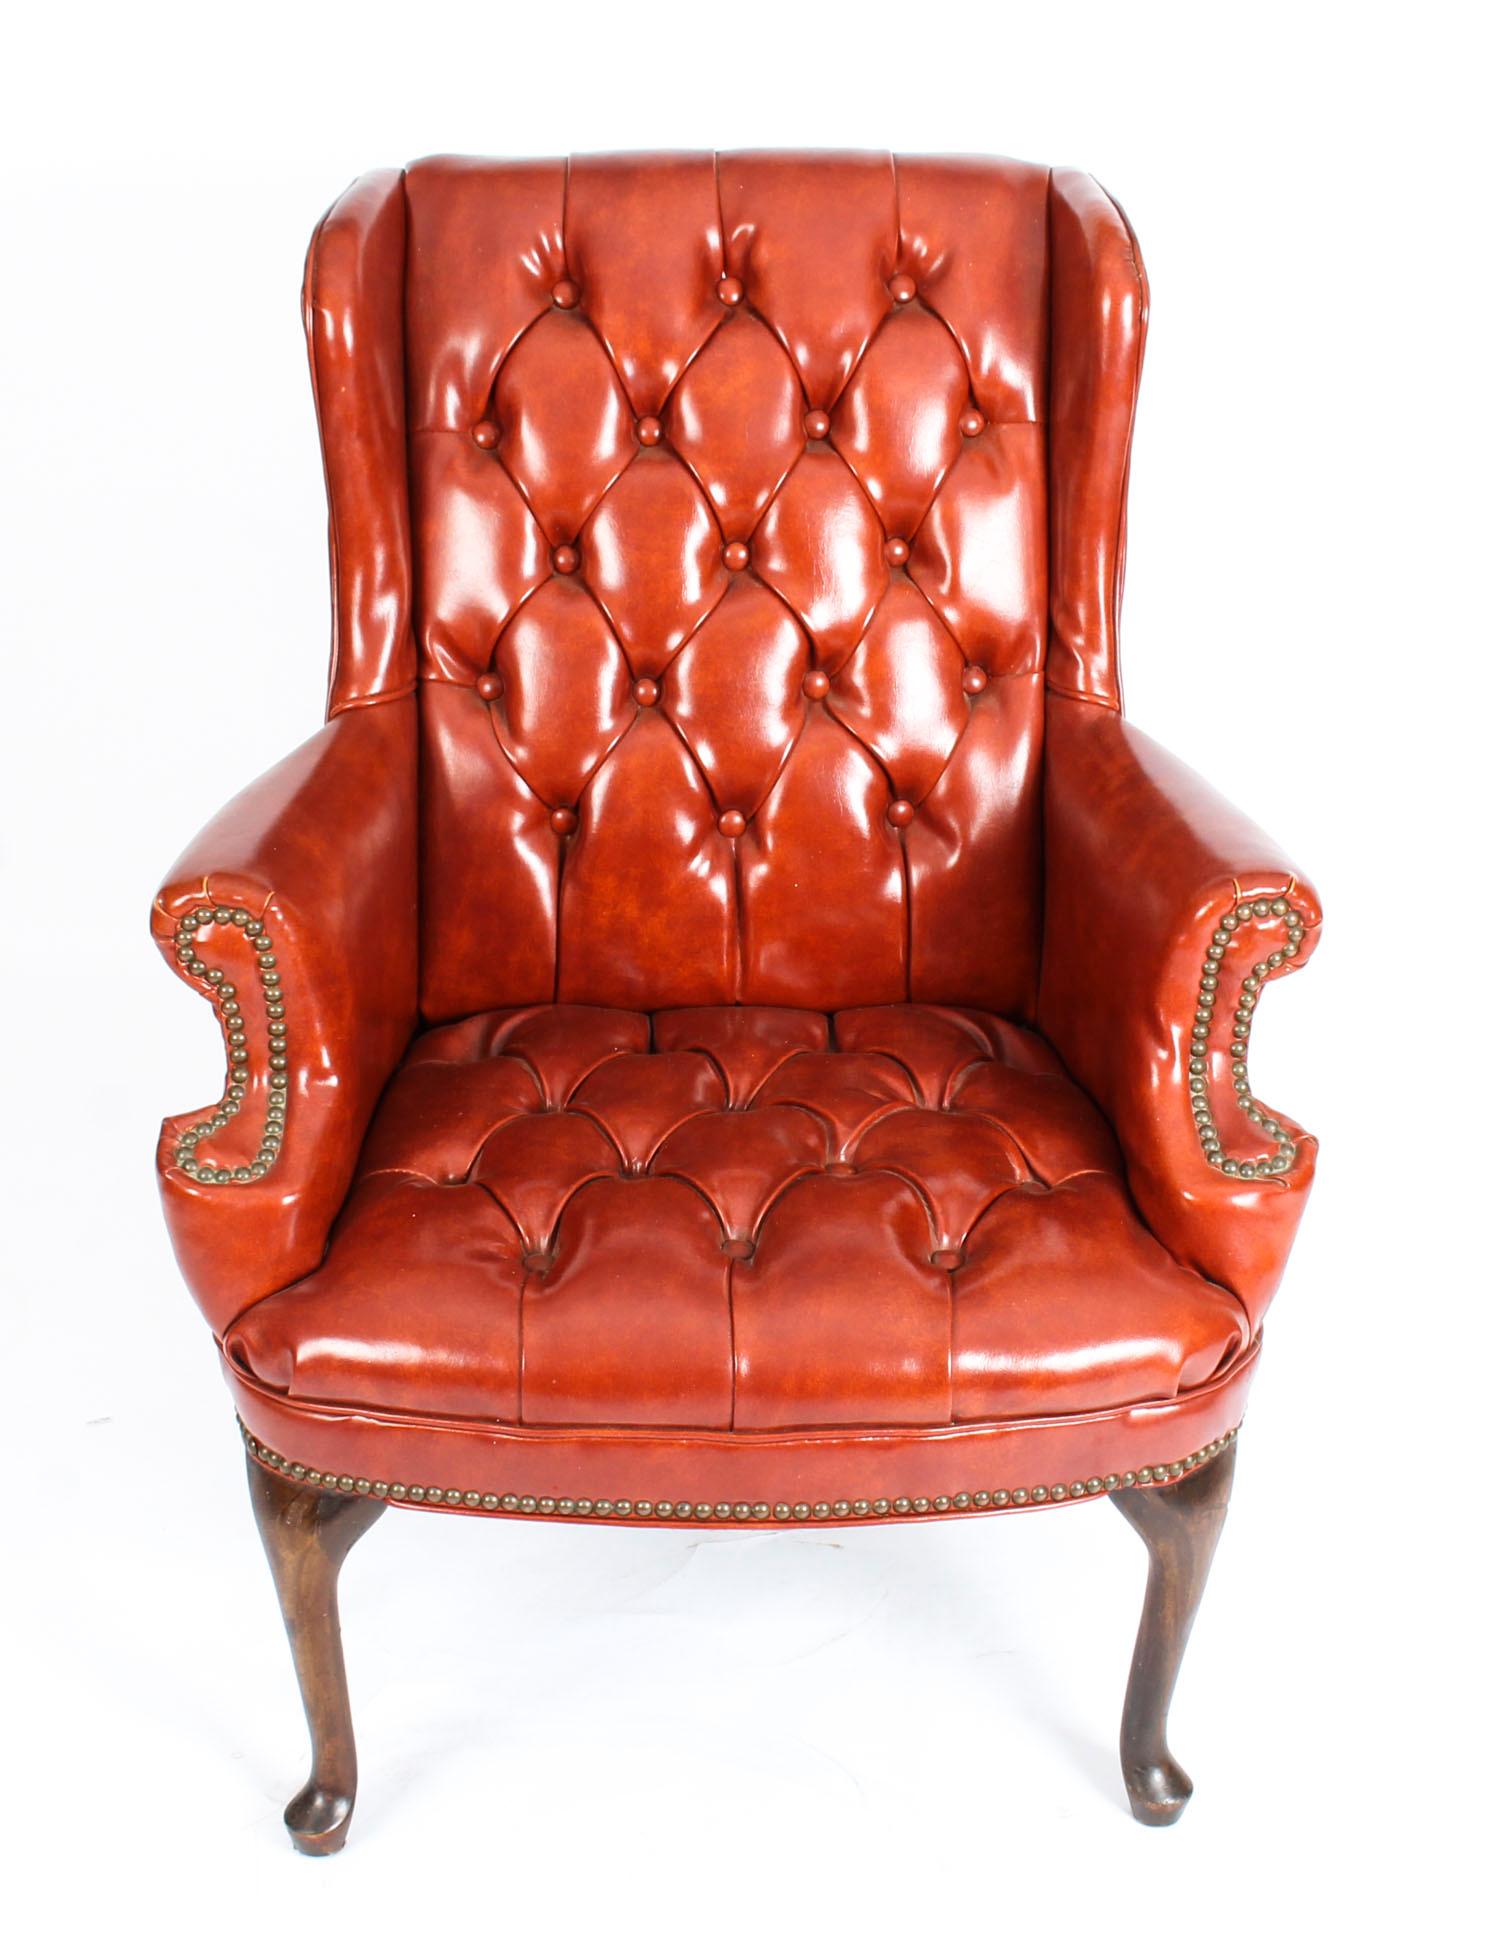 This is a very handsome antique Chippendale Revival Chesterfield wingback leather armchair, circa 1900 in date.
This beautiful armchair is upholstered in a sumptuous tan leather, features a buttoned back and seat, with scrolled arms inlaid with